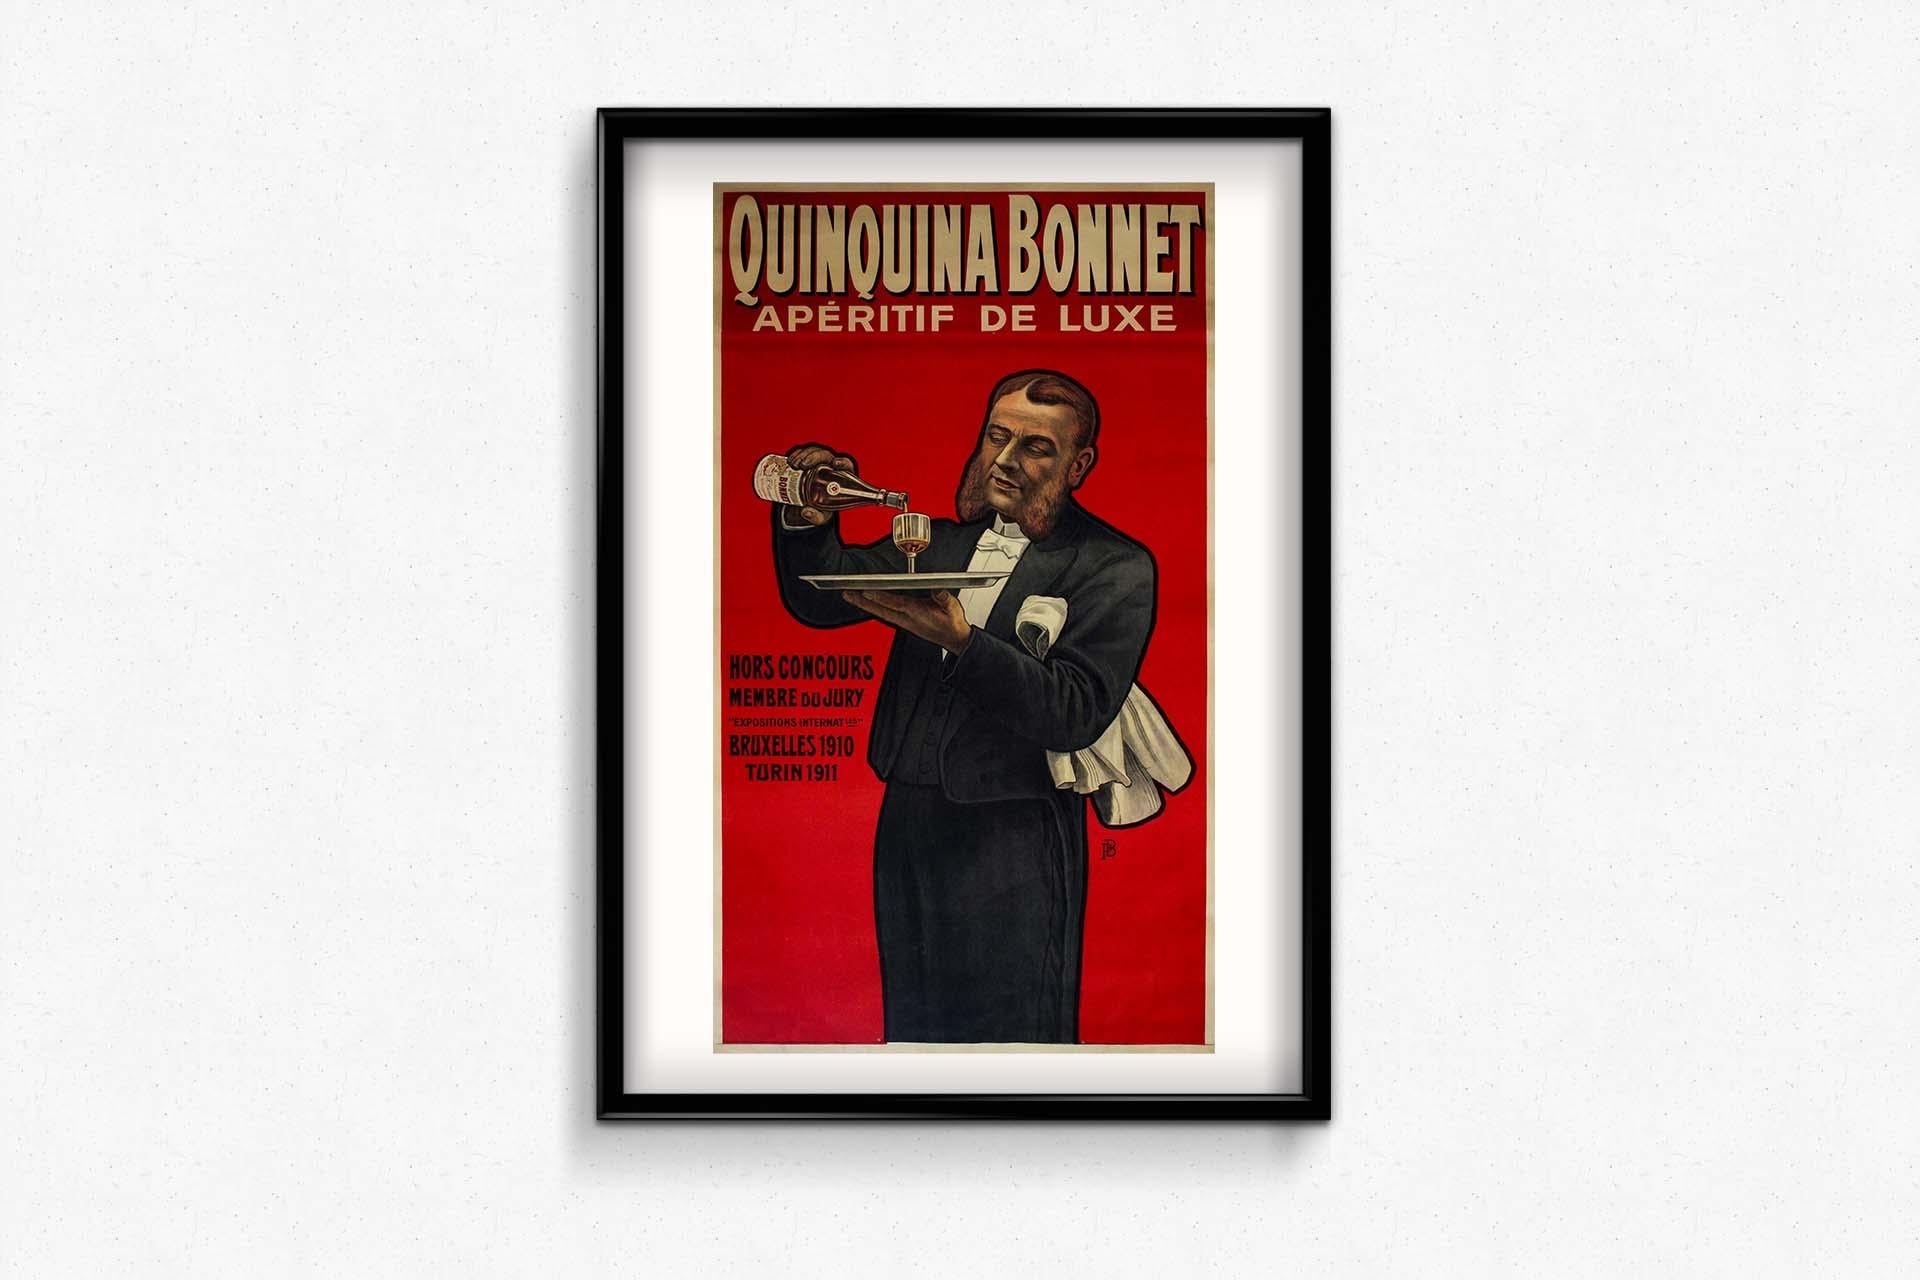 1911 Quinquina Bonnet original aperitif poster by PB - French Advertising For Sale 2